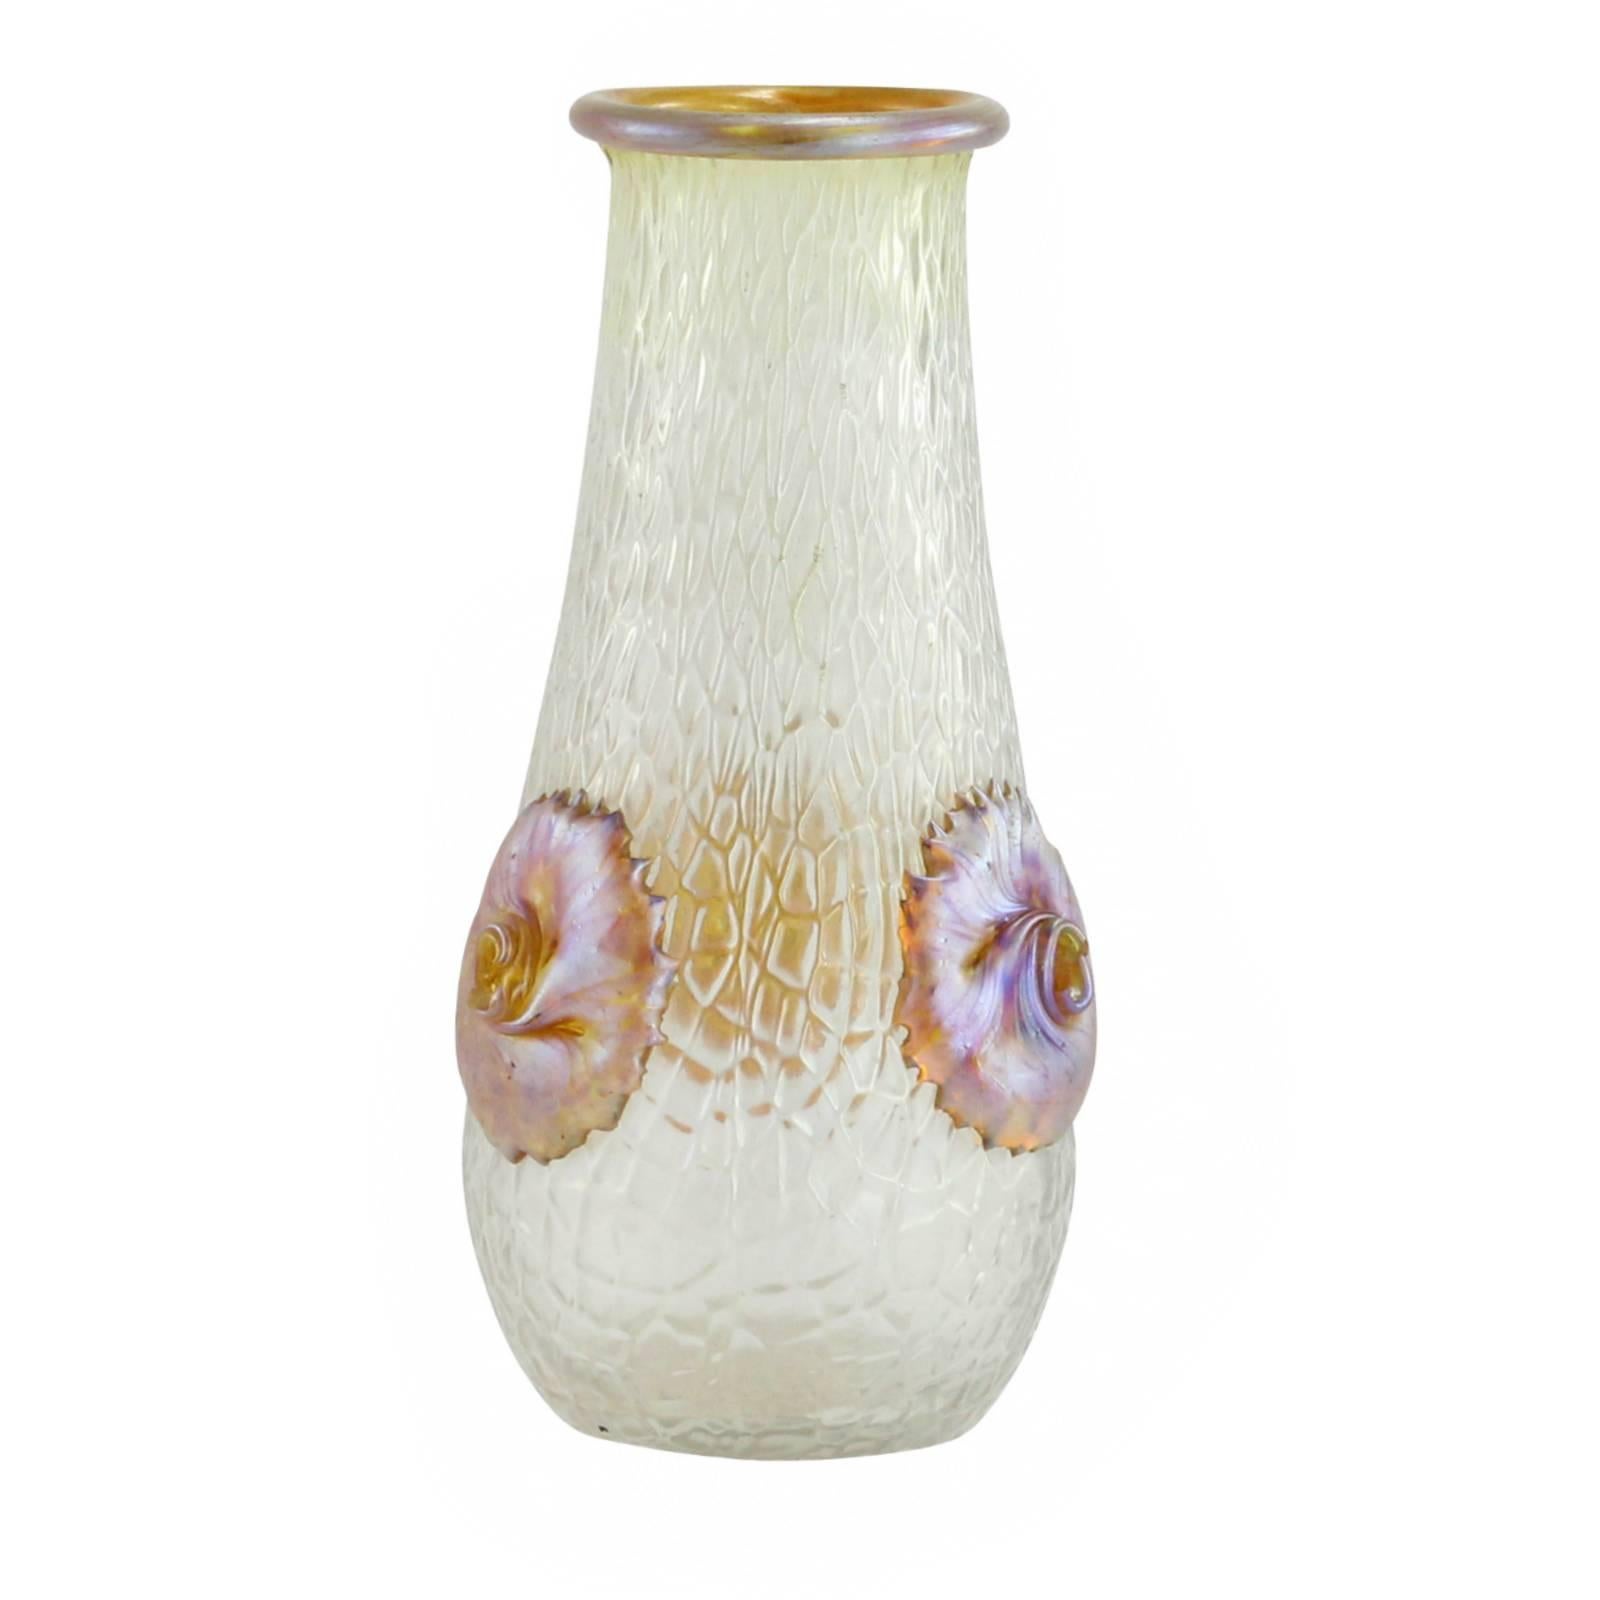 An early 20th century Bohemian glass vase, in the 'Nautilus' decor on a martele ground, by famed glass manufacturer Loetz.